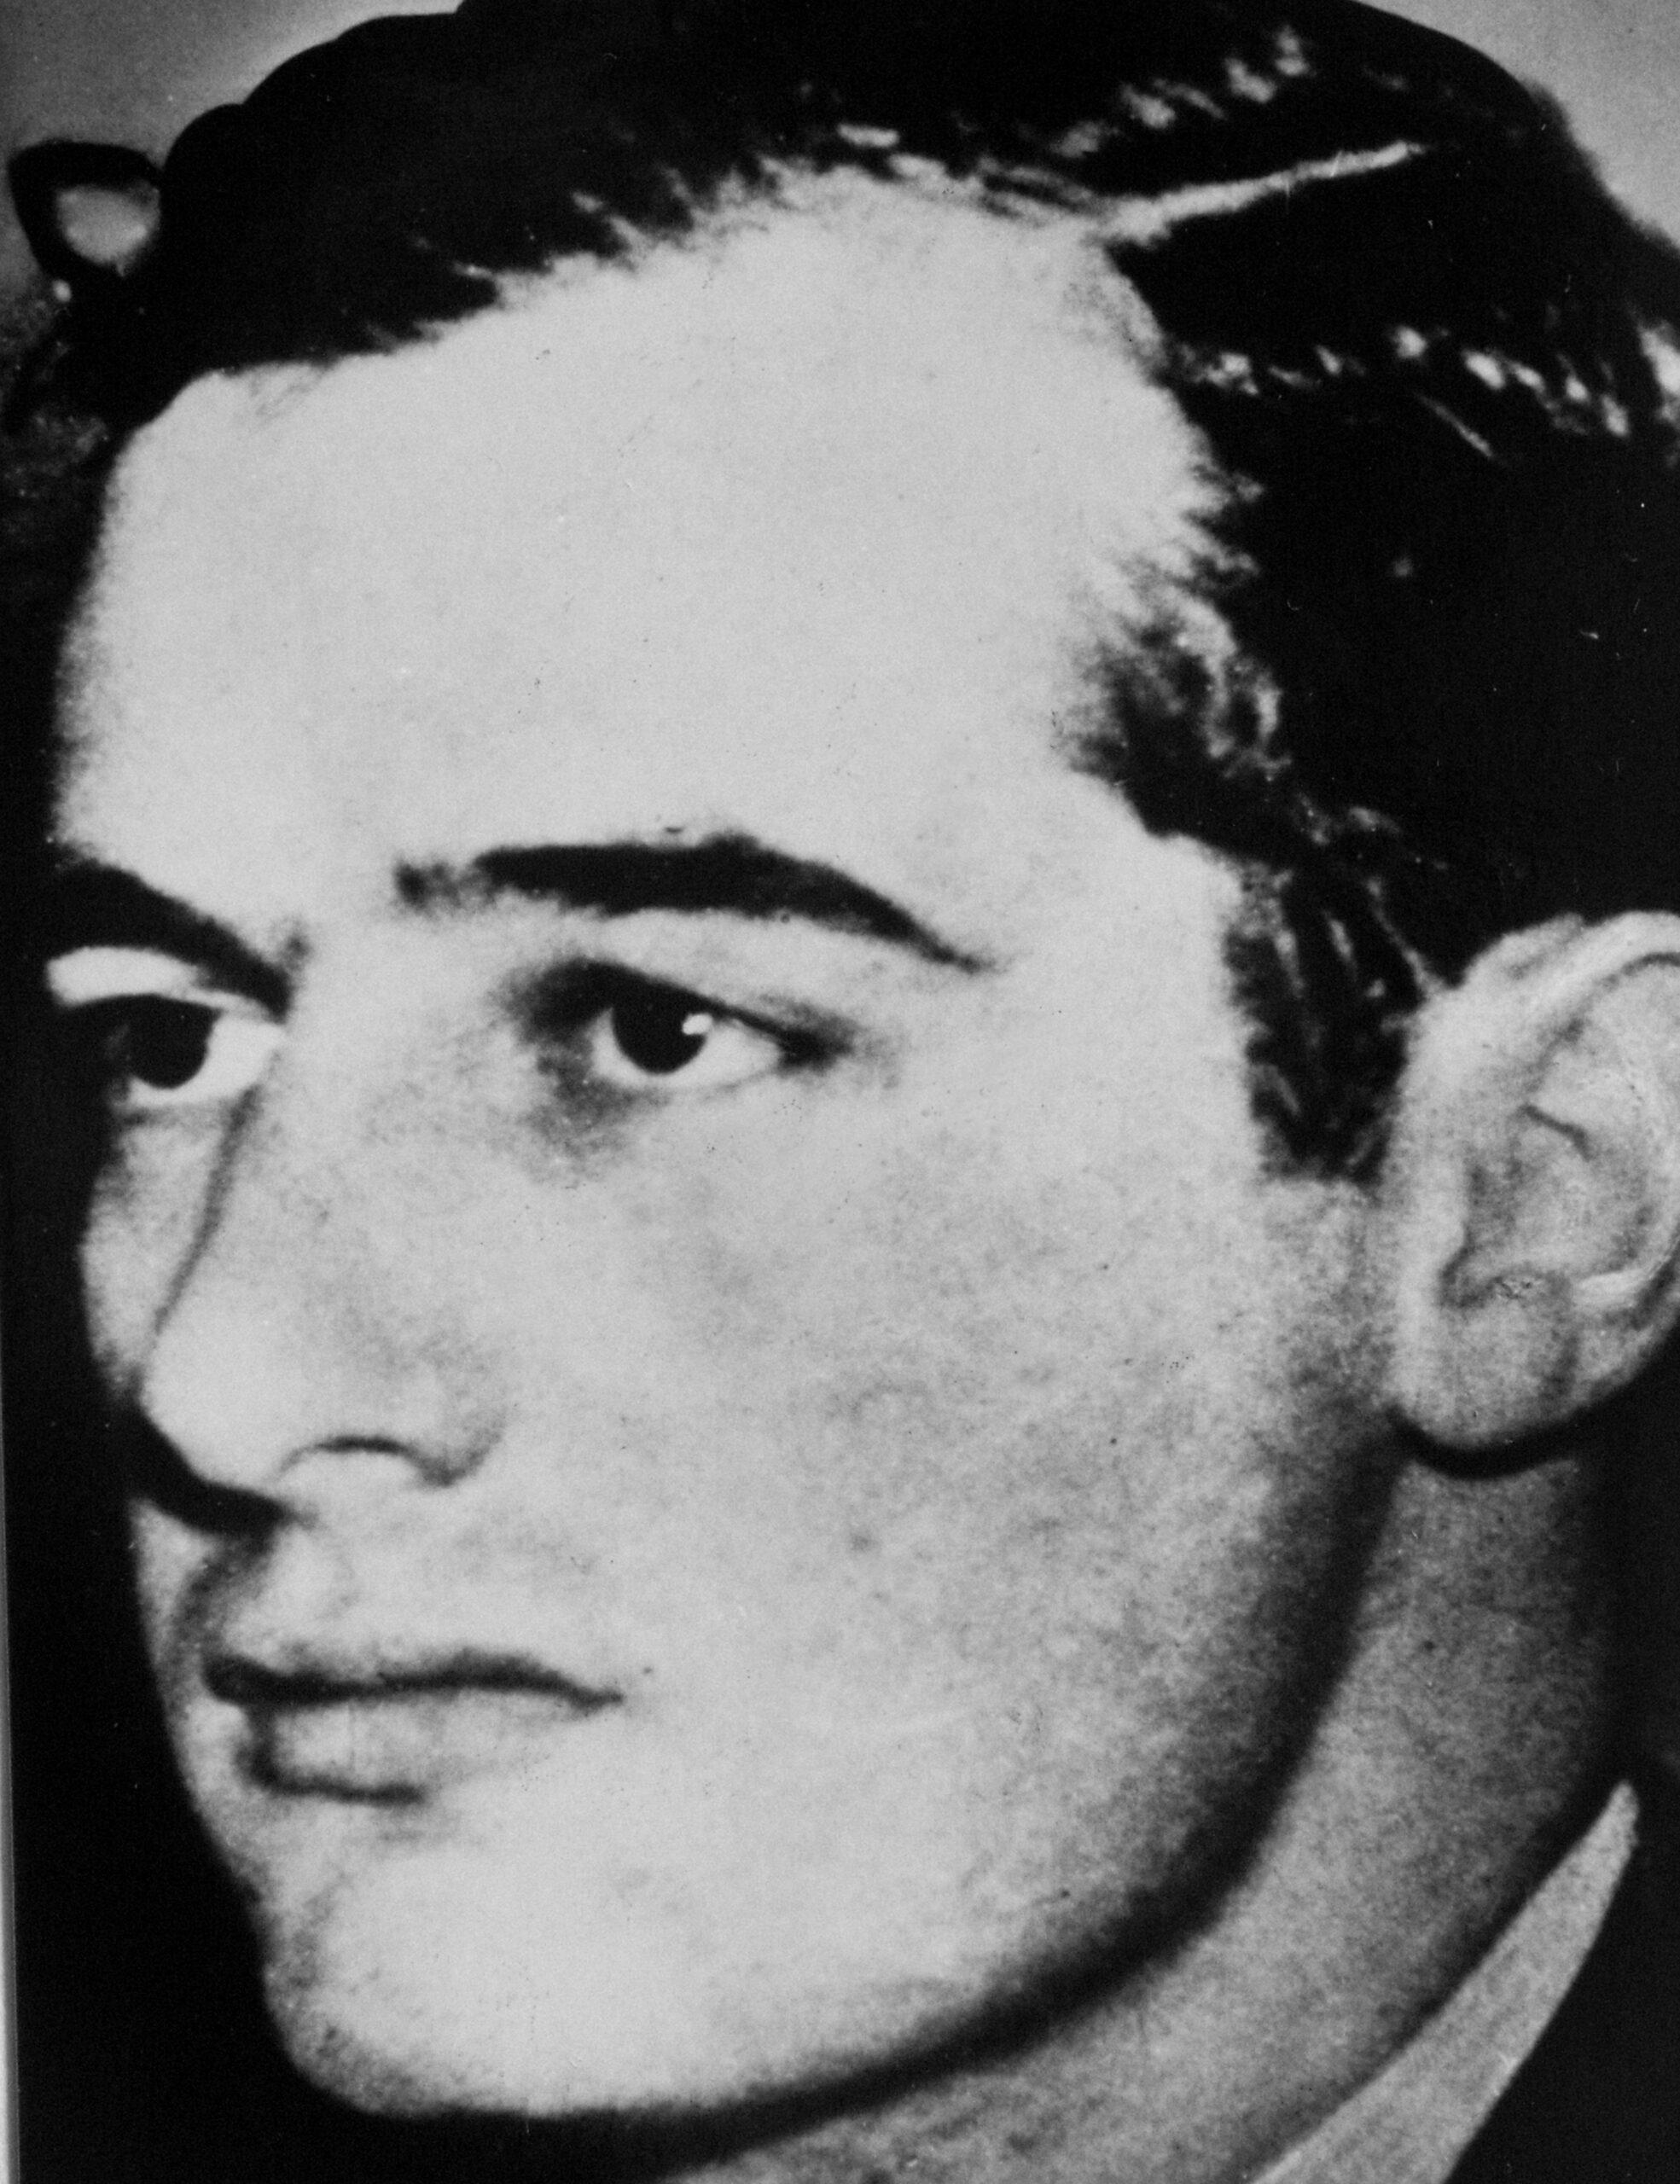 Black-and-white close-up of Raoul Wallenberg's face.